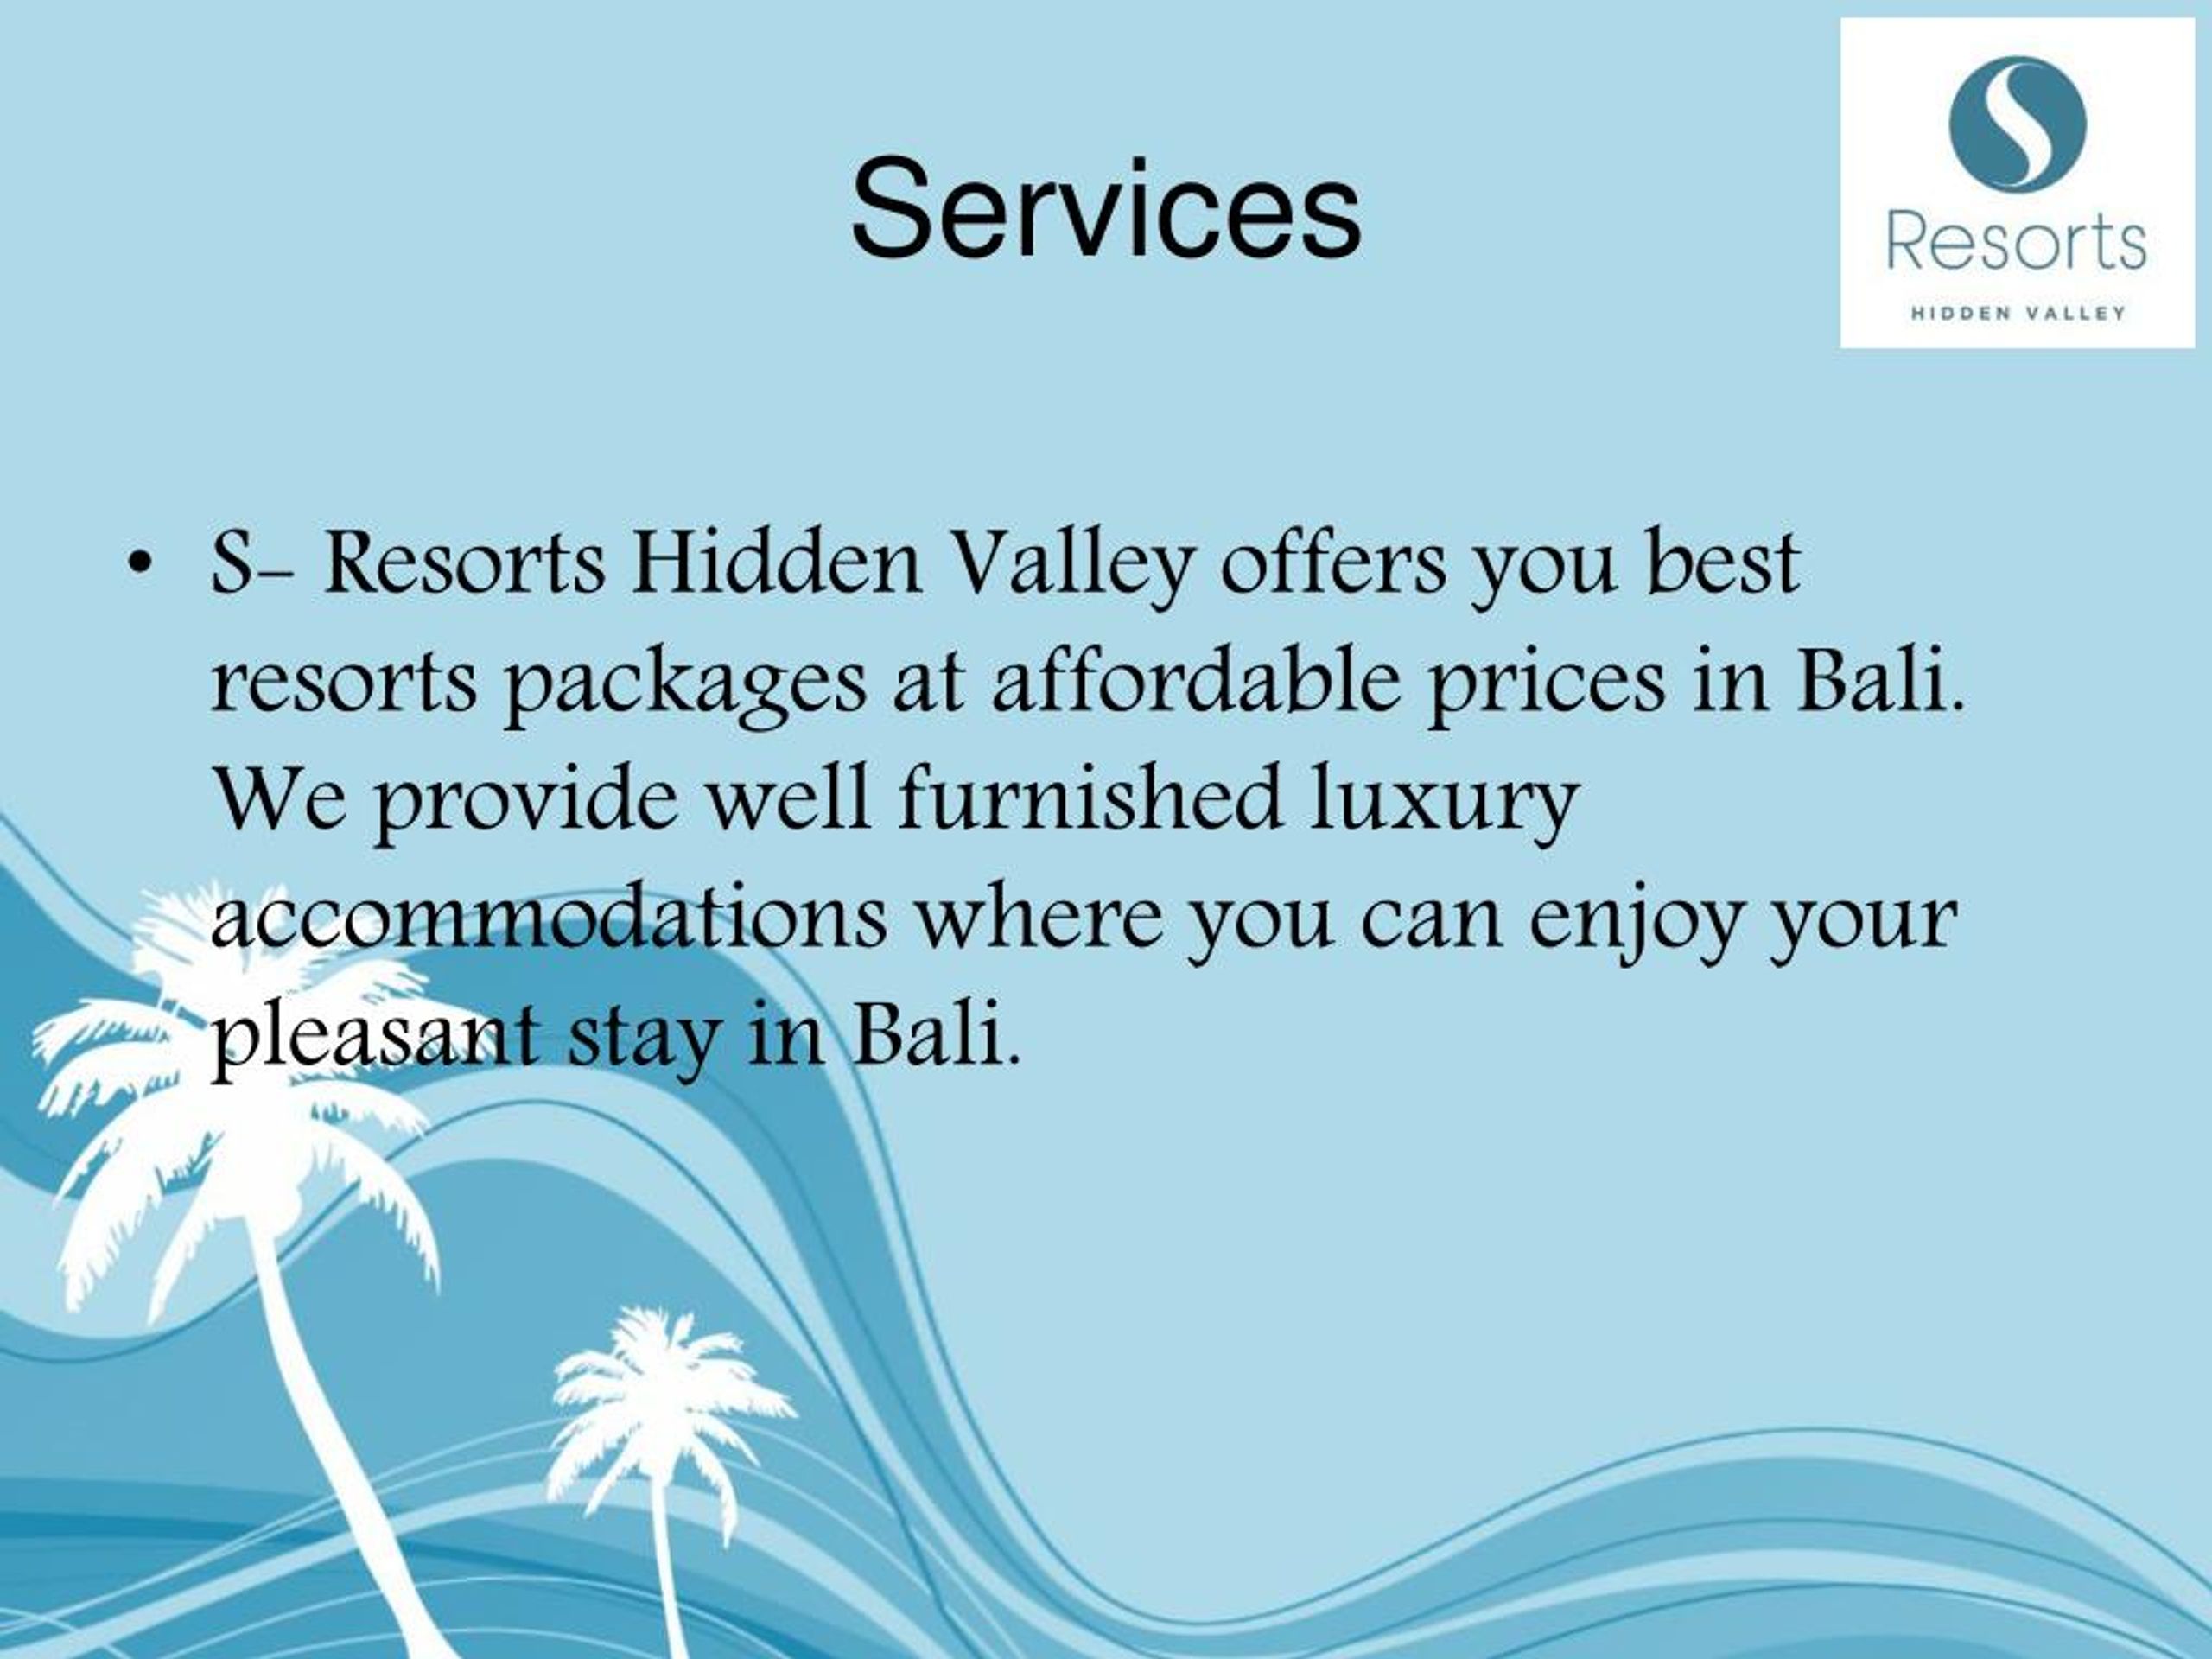 PPT - Enjoy best resorts packages at affodable prices in bali ...